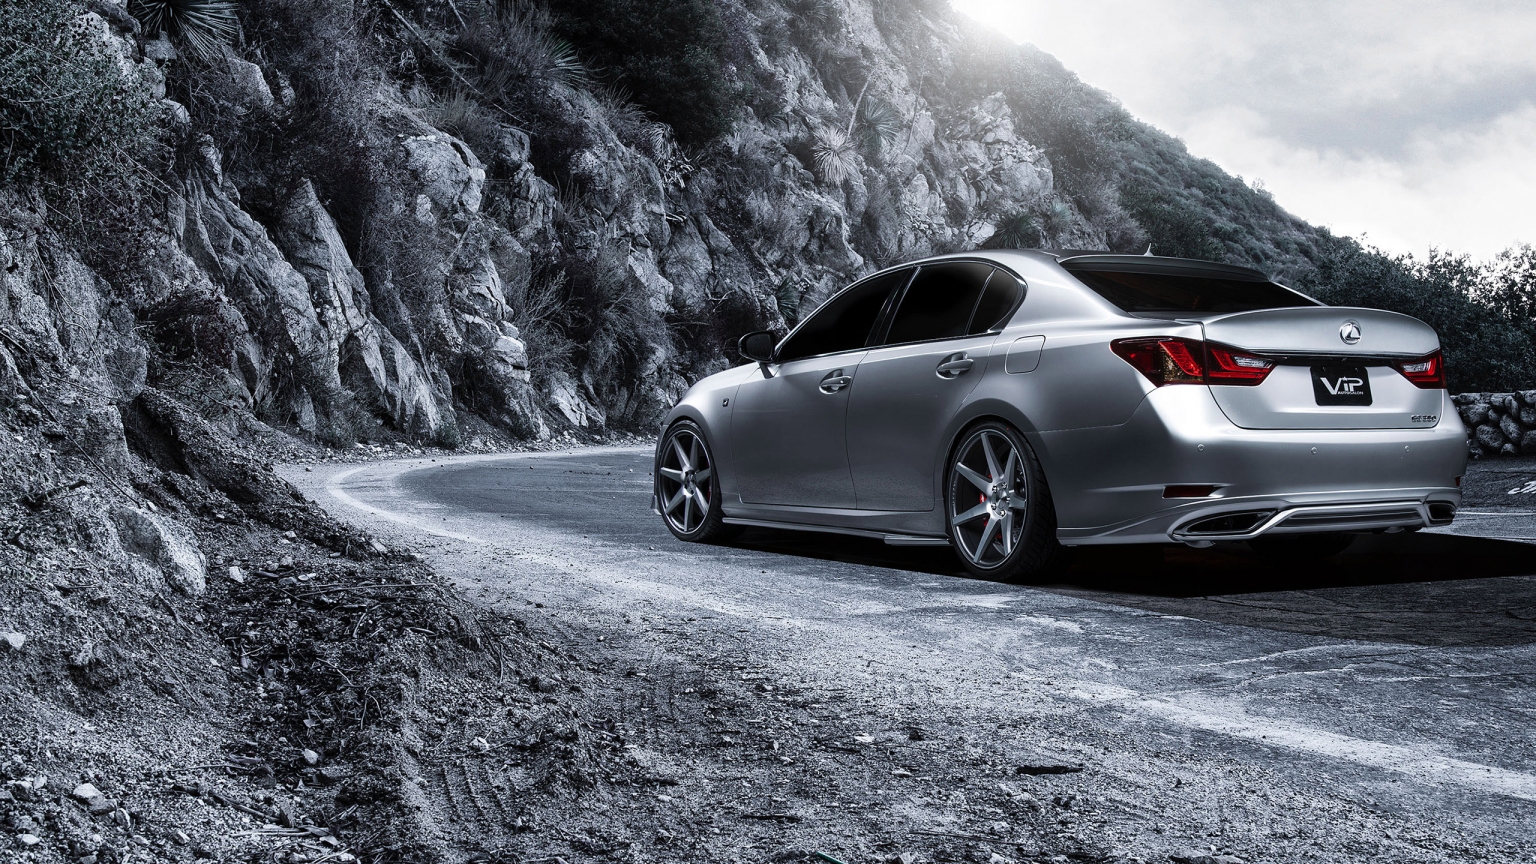 Lexus GS 350 Supercharged Rear for 1536 x 864 HDTV resolution